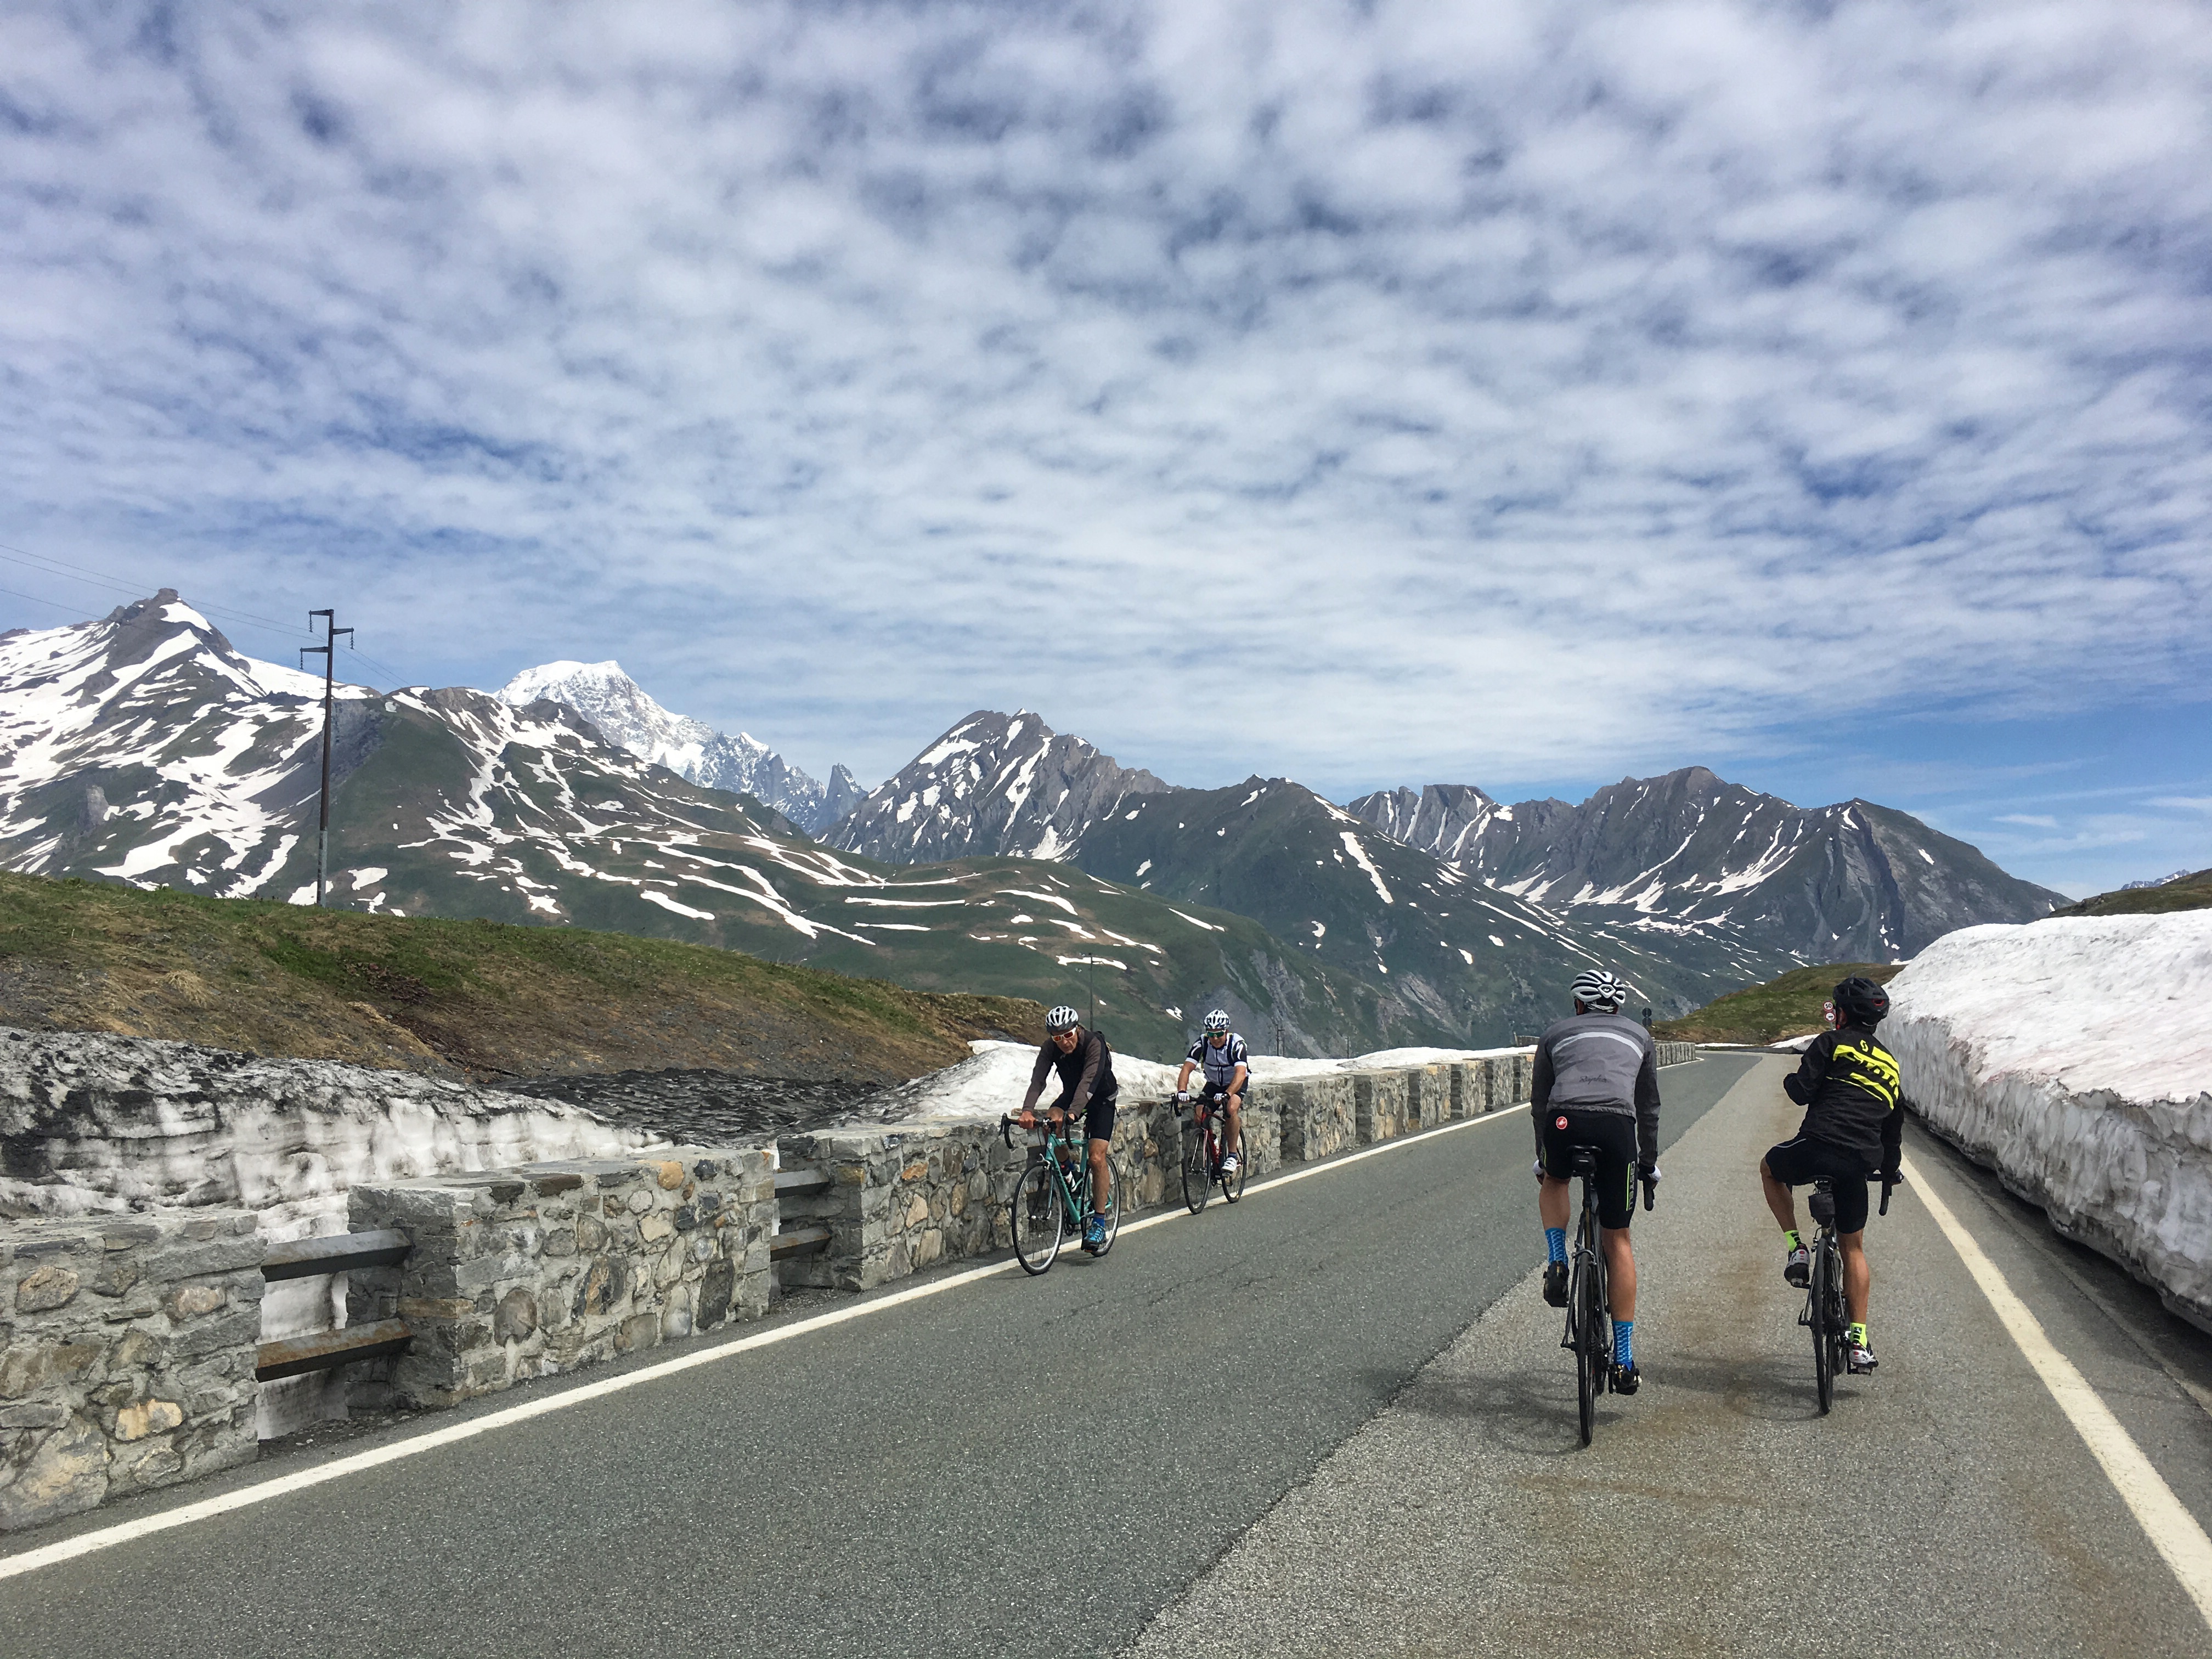 Bourg Saint-Maurice, La Rosiere, Petit St Bernard and into Italy (& back) – French and Italian Alps